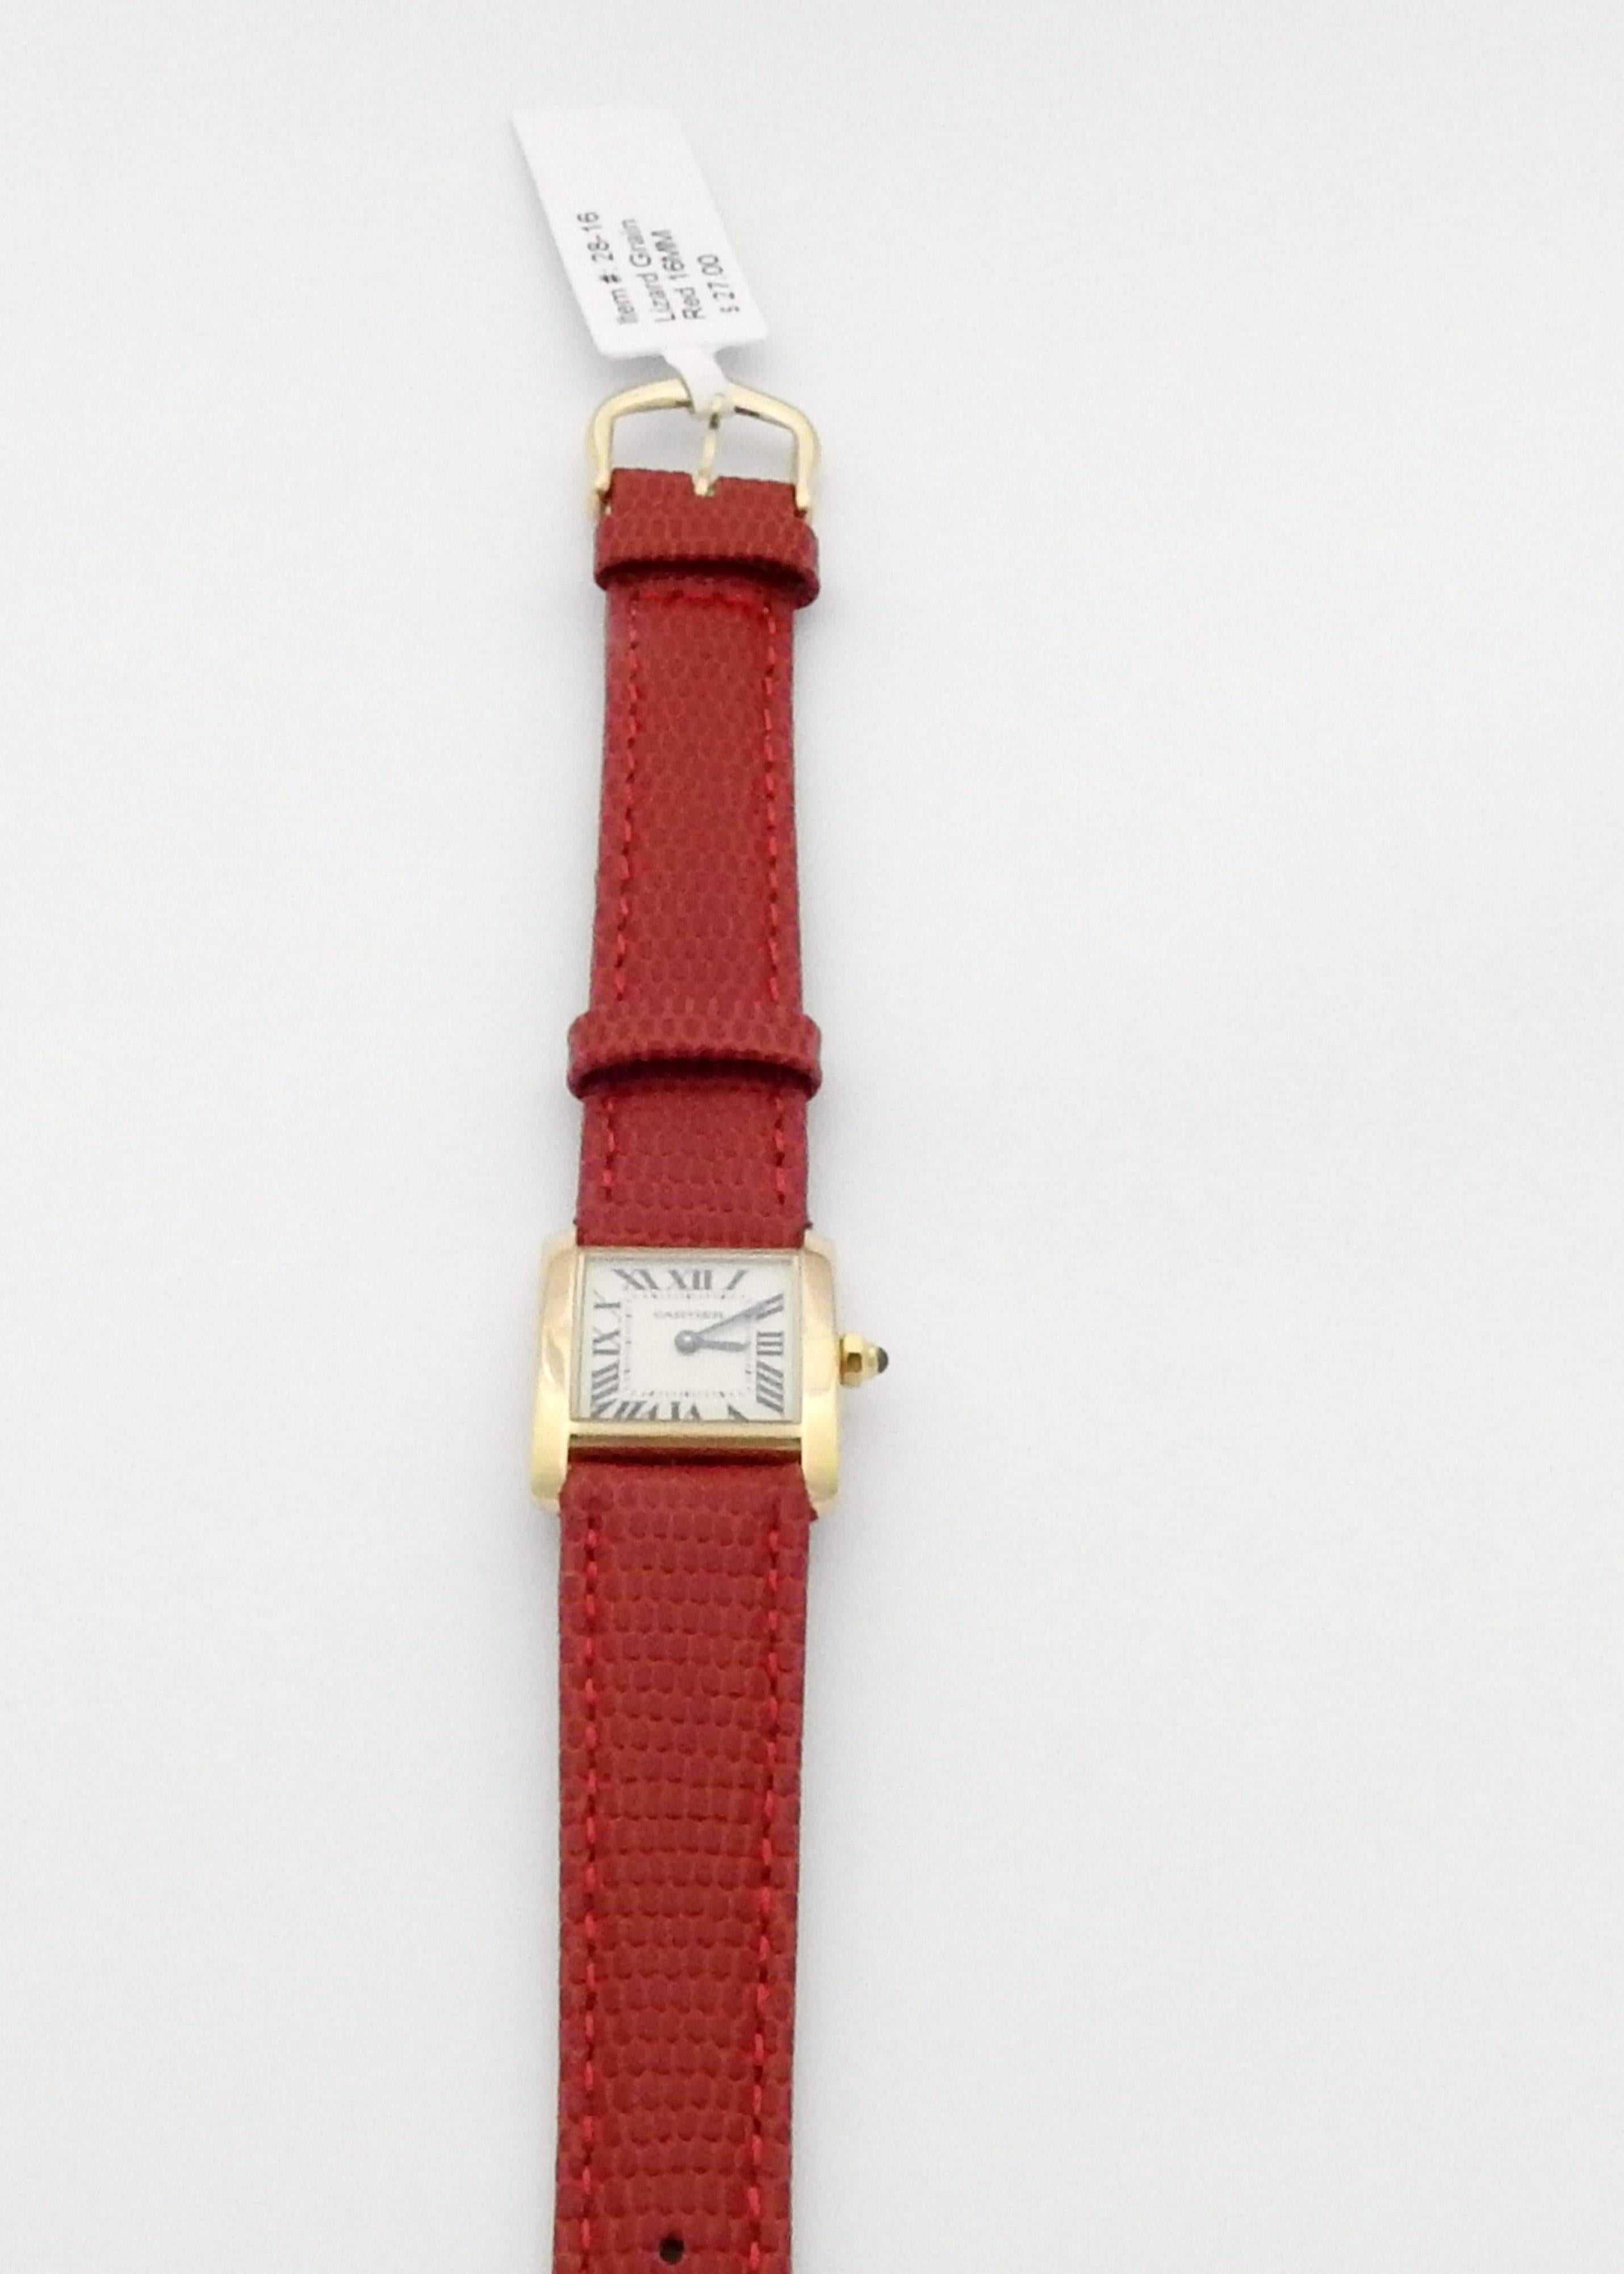 Cartier Tank Francaise Ladies Watch

Model: 1820
Serial: MG230541

Quartz Movement

Case is 18K yellow Gold,  24.5 mm x 20 mm x 5 mm

New red leather band - NOT cartier...16mm, size 28, DeBeers

Sapphire Crown

approx. 8.5 